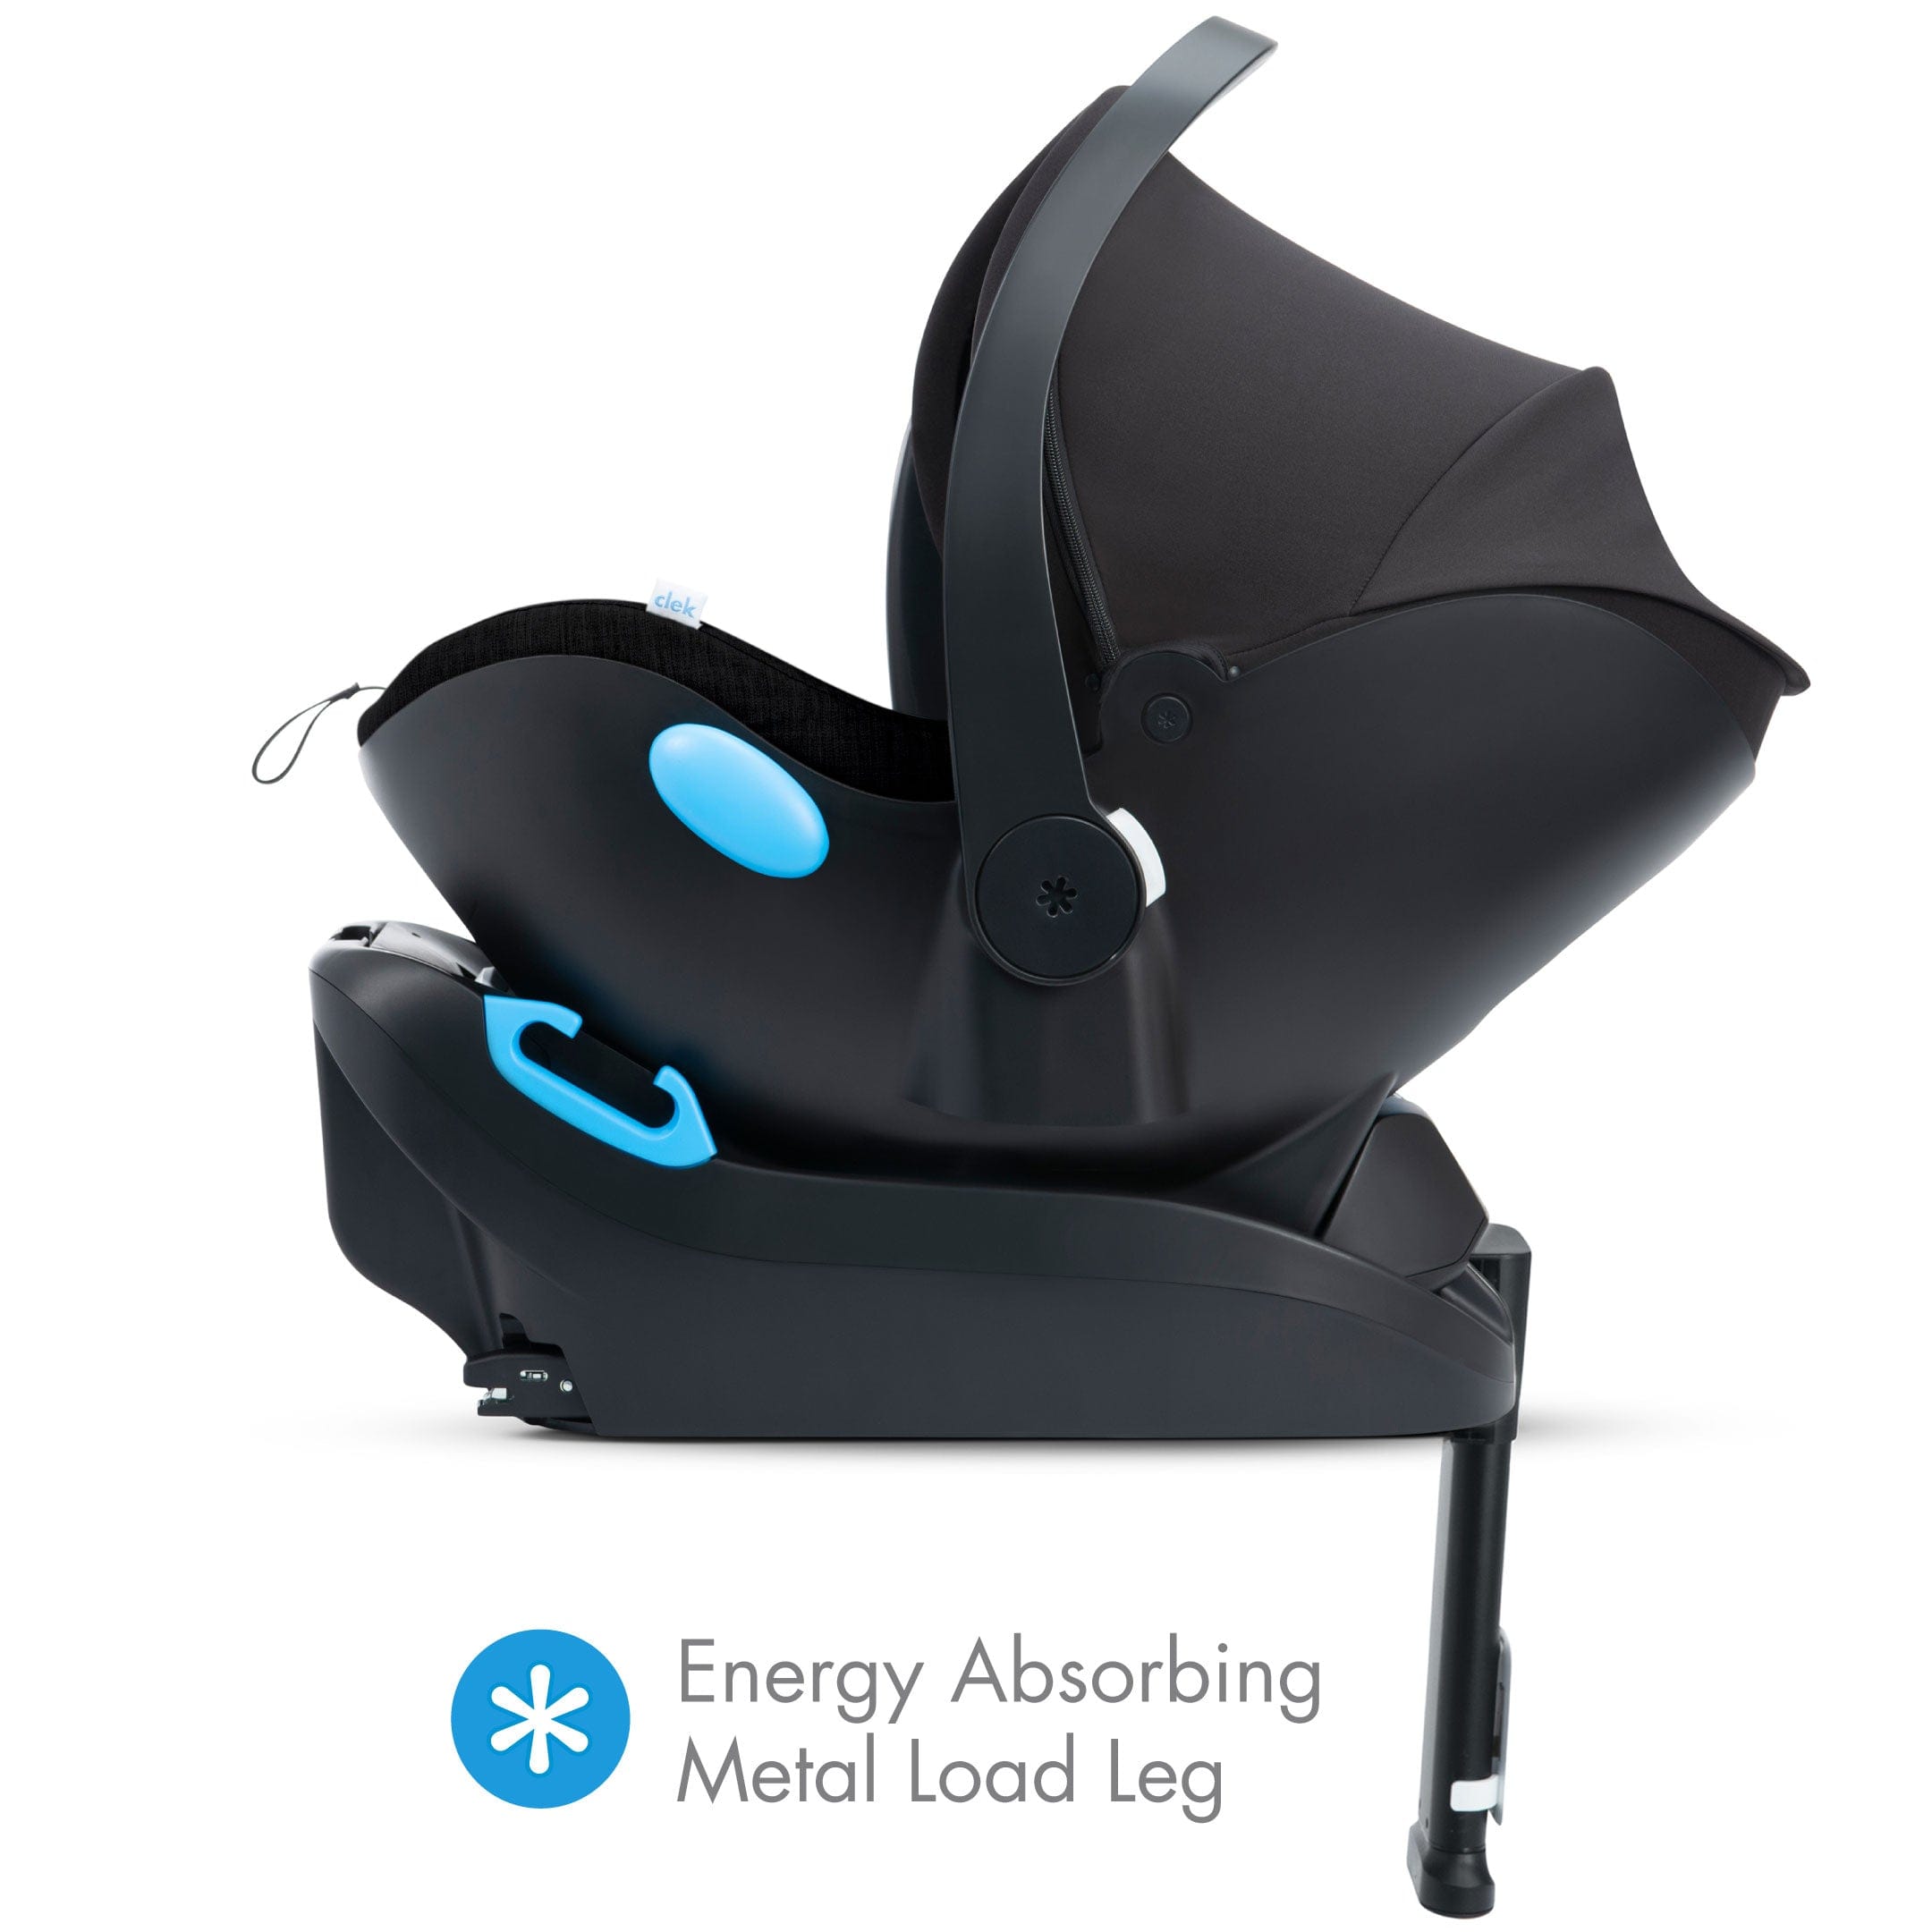 Clek Infant Seat liing all-groups